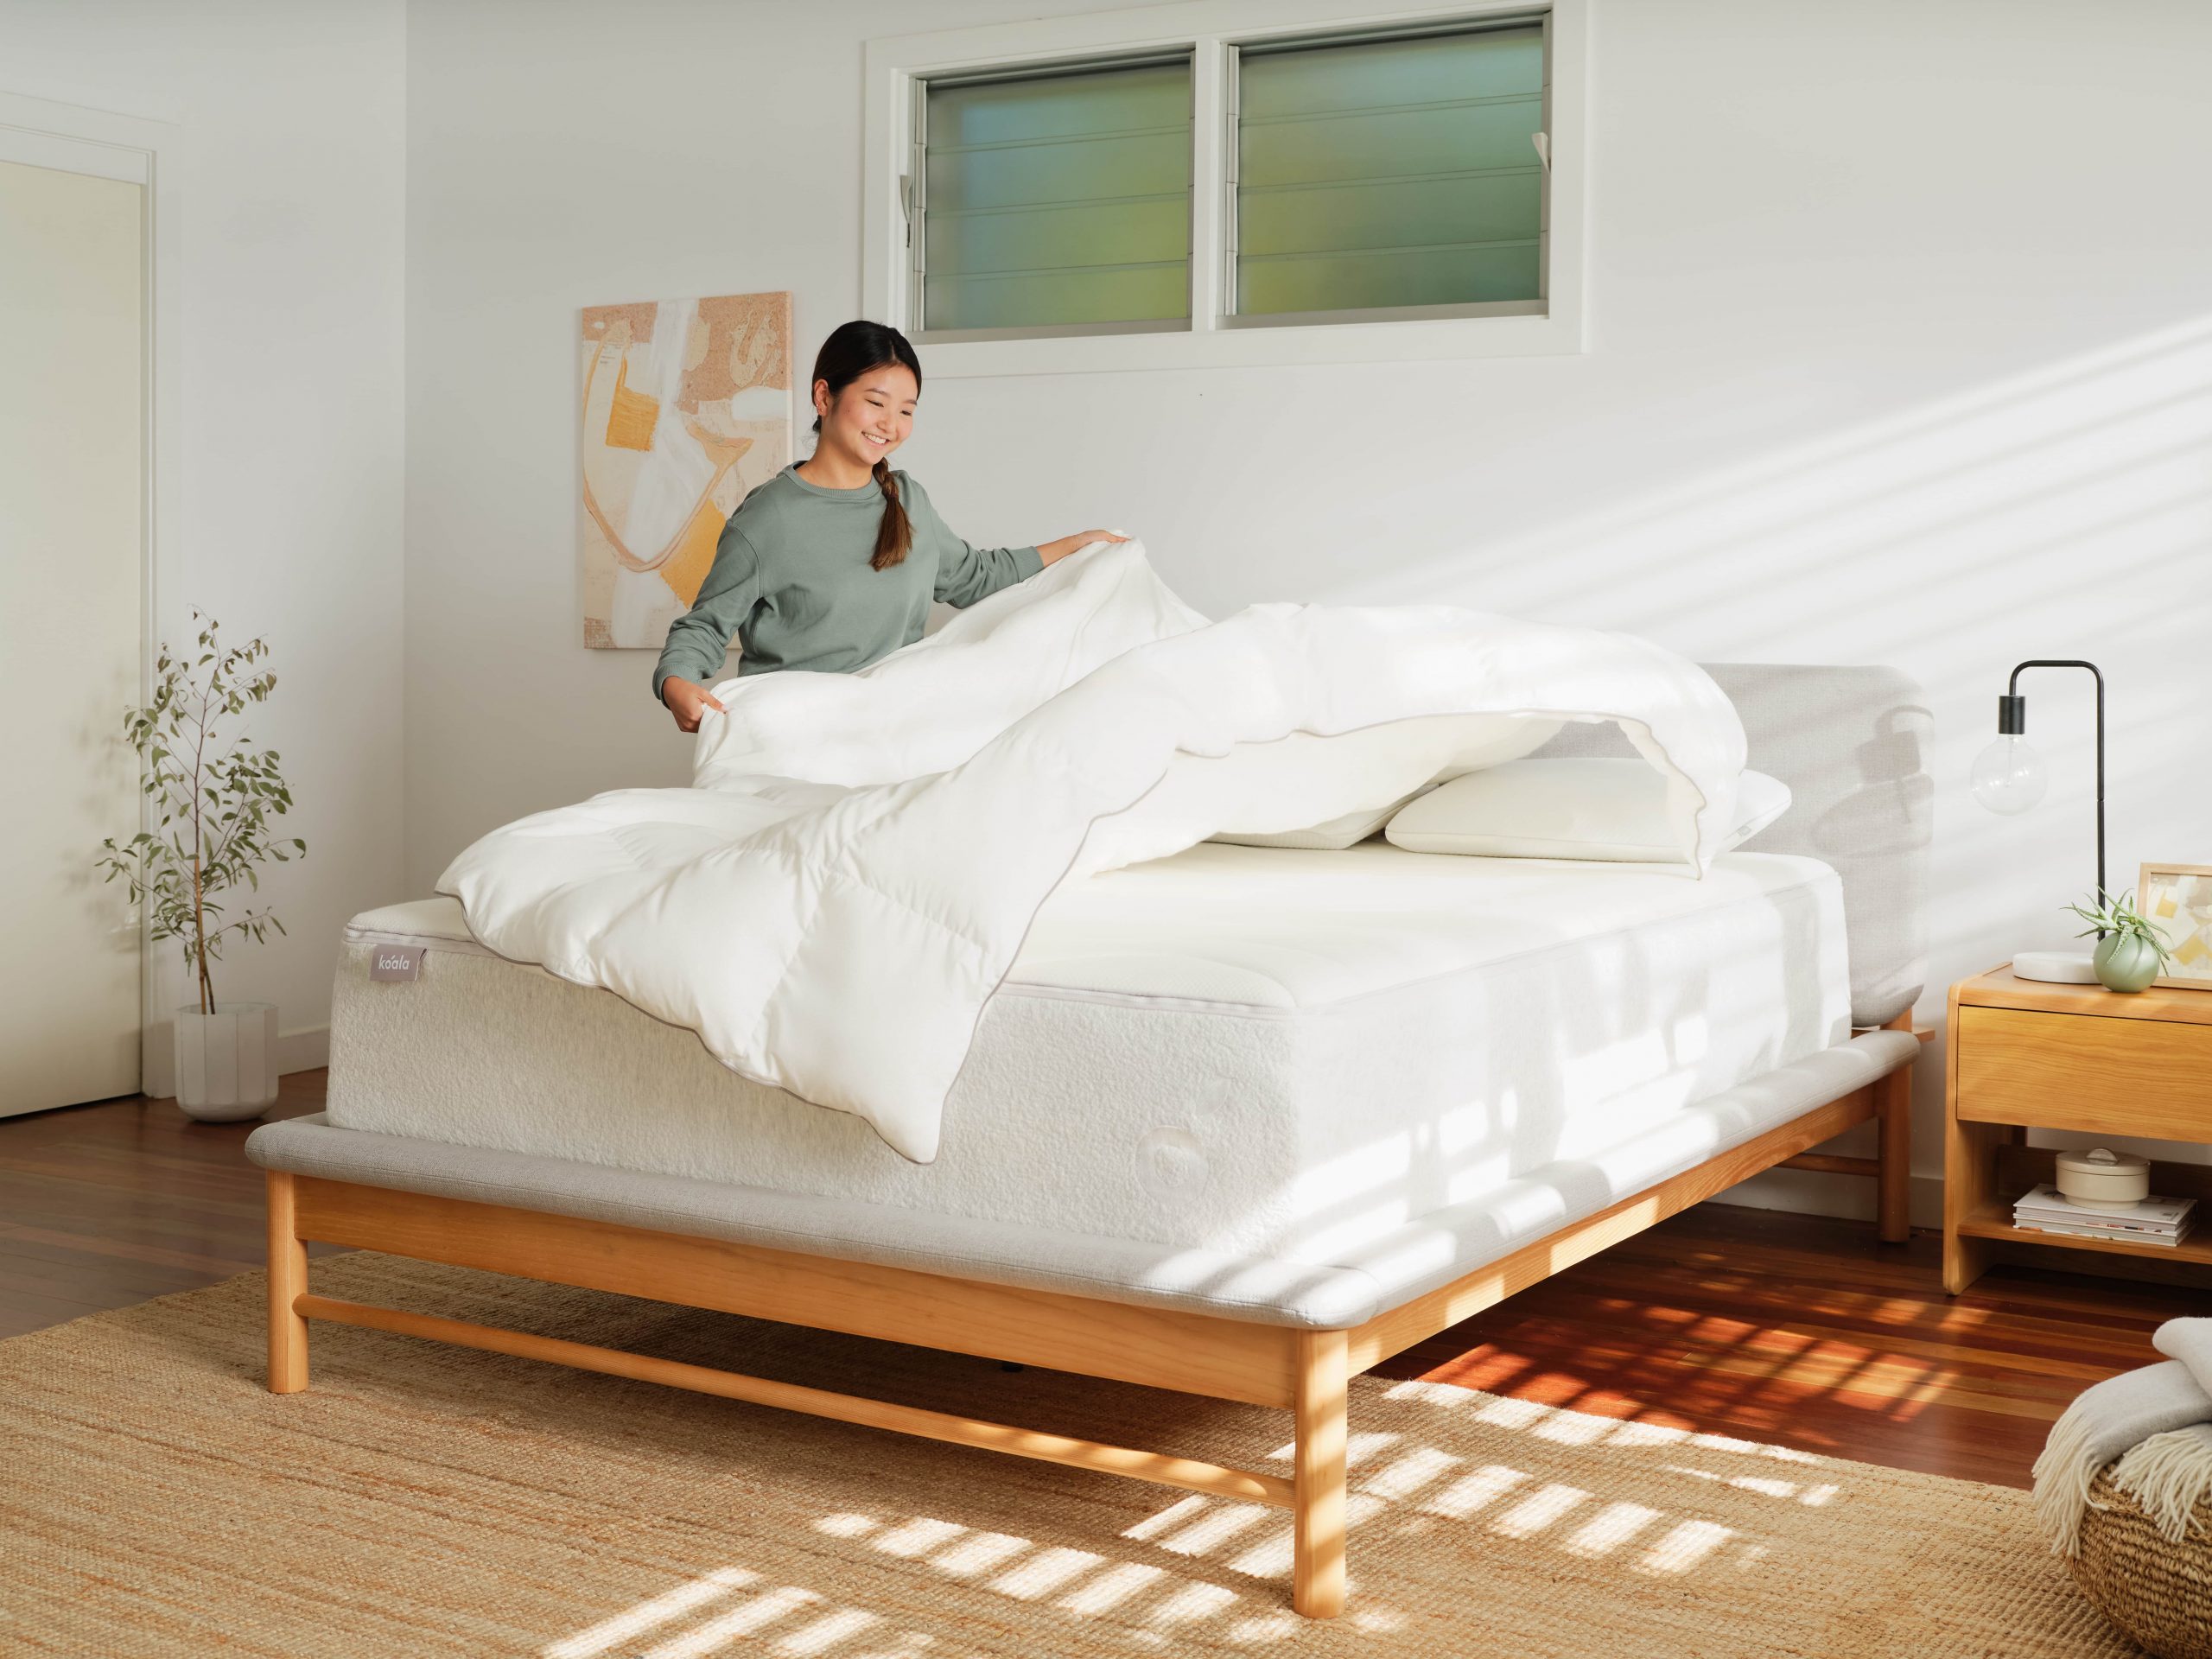 The best bedtime routine for adults involves winding down and preparing yourself and your bed for a comfortable sleep, as this woman is doing in her bedroom